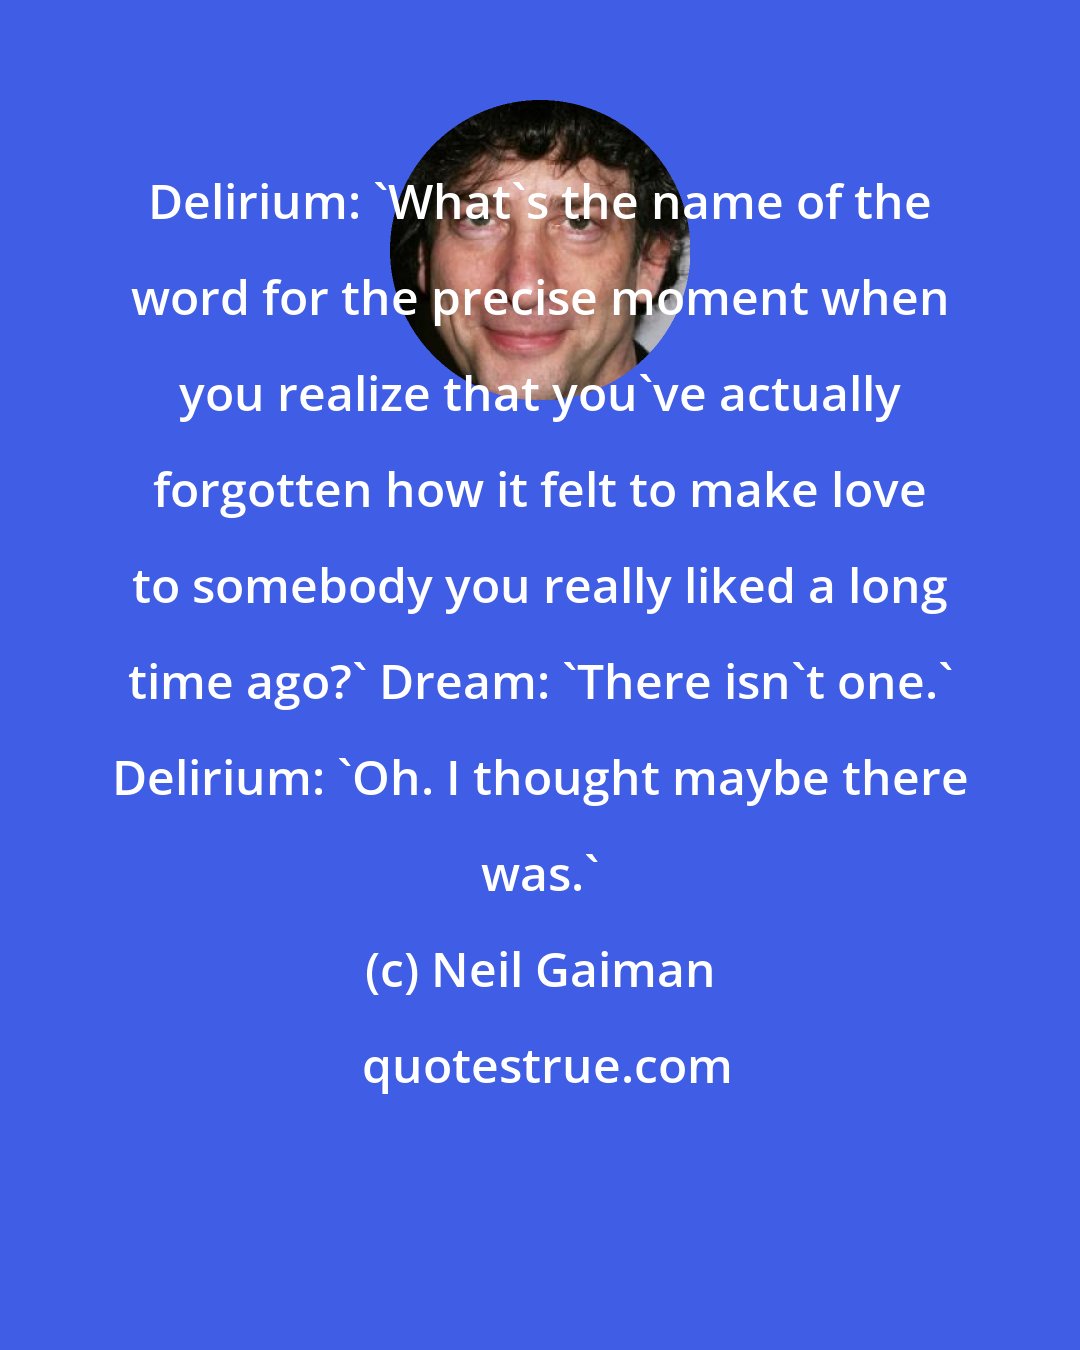 Neil Gaiman: Delirium: 'What's the name of the word for the precise moment when you realize that you've actually forgotten how it felt to make love to somebody you really liked a long time ago?' Dream: 'There isn't one.' Delirium: 'Oh. I thought maybe there was.'